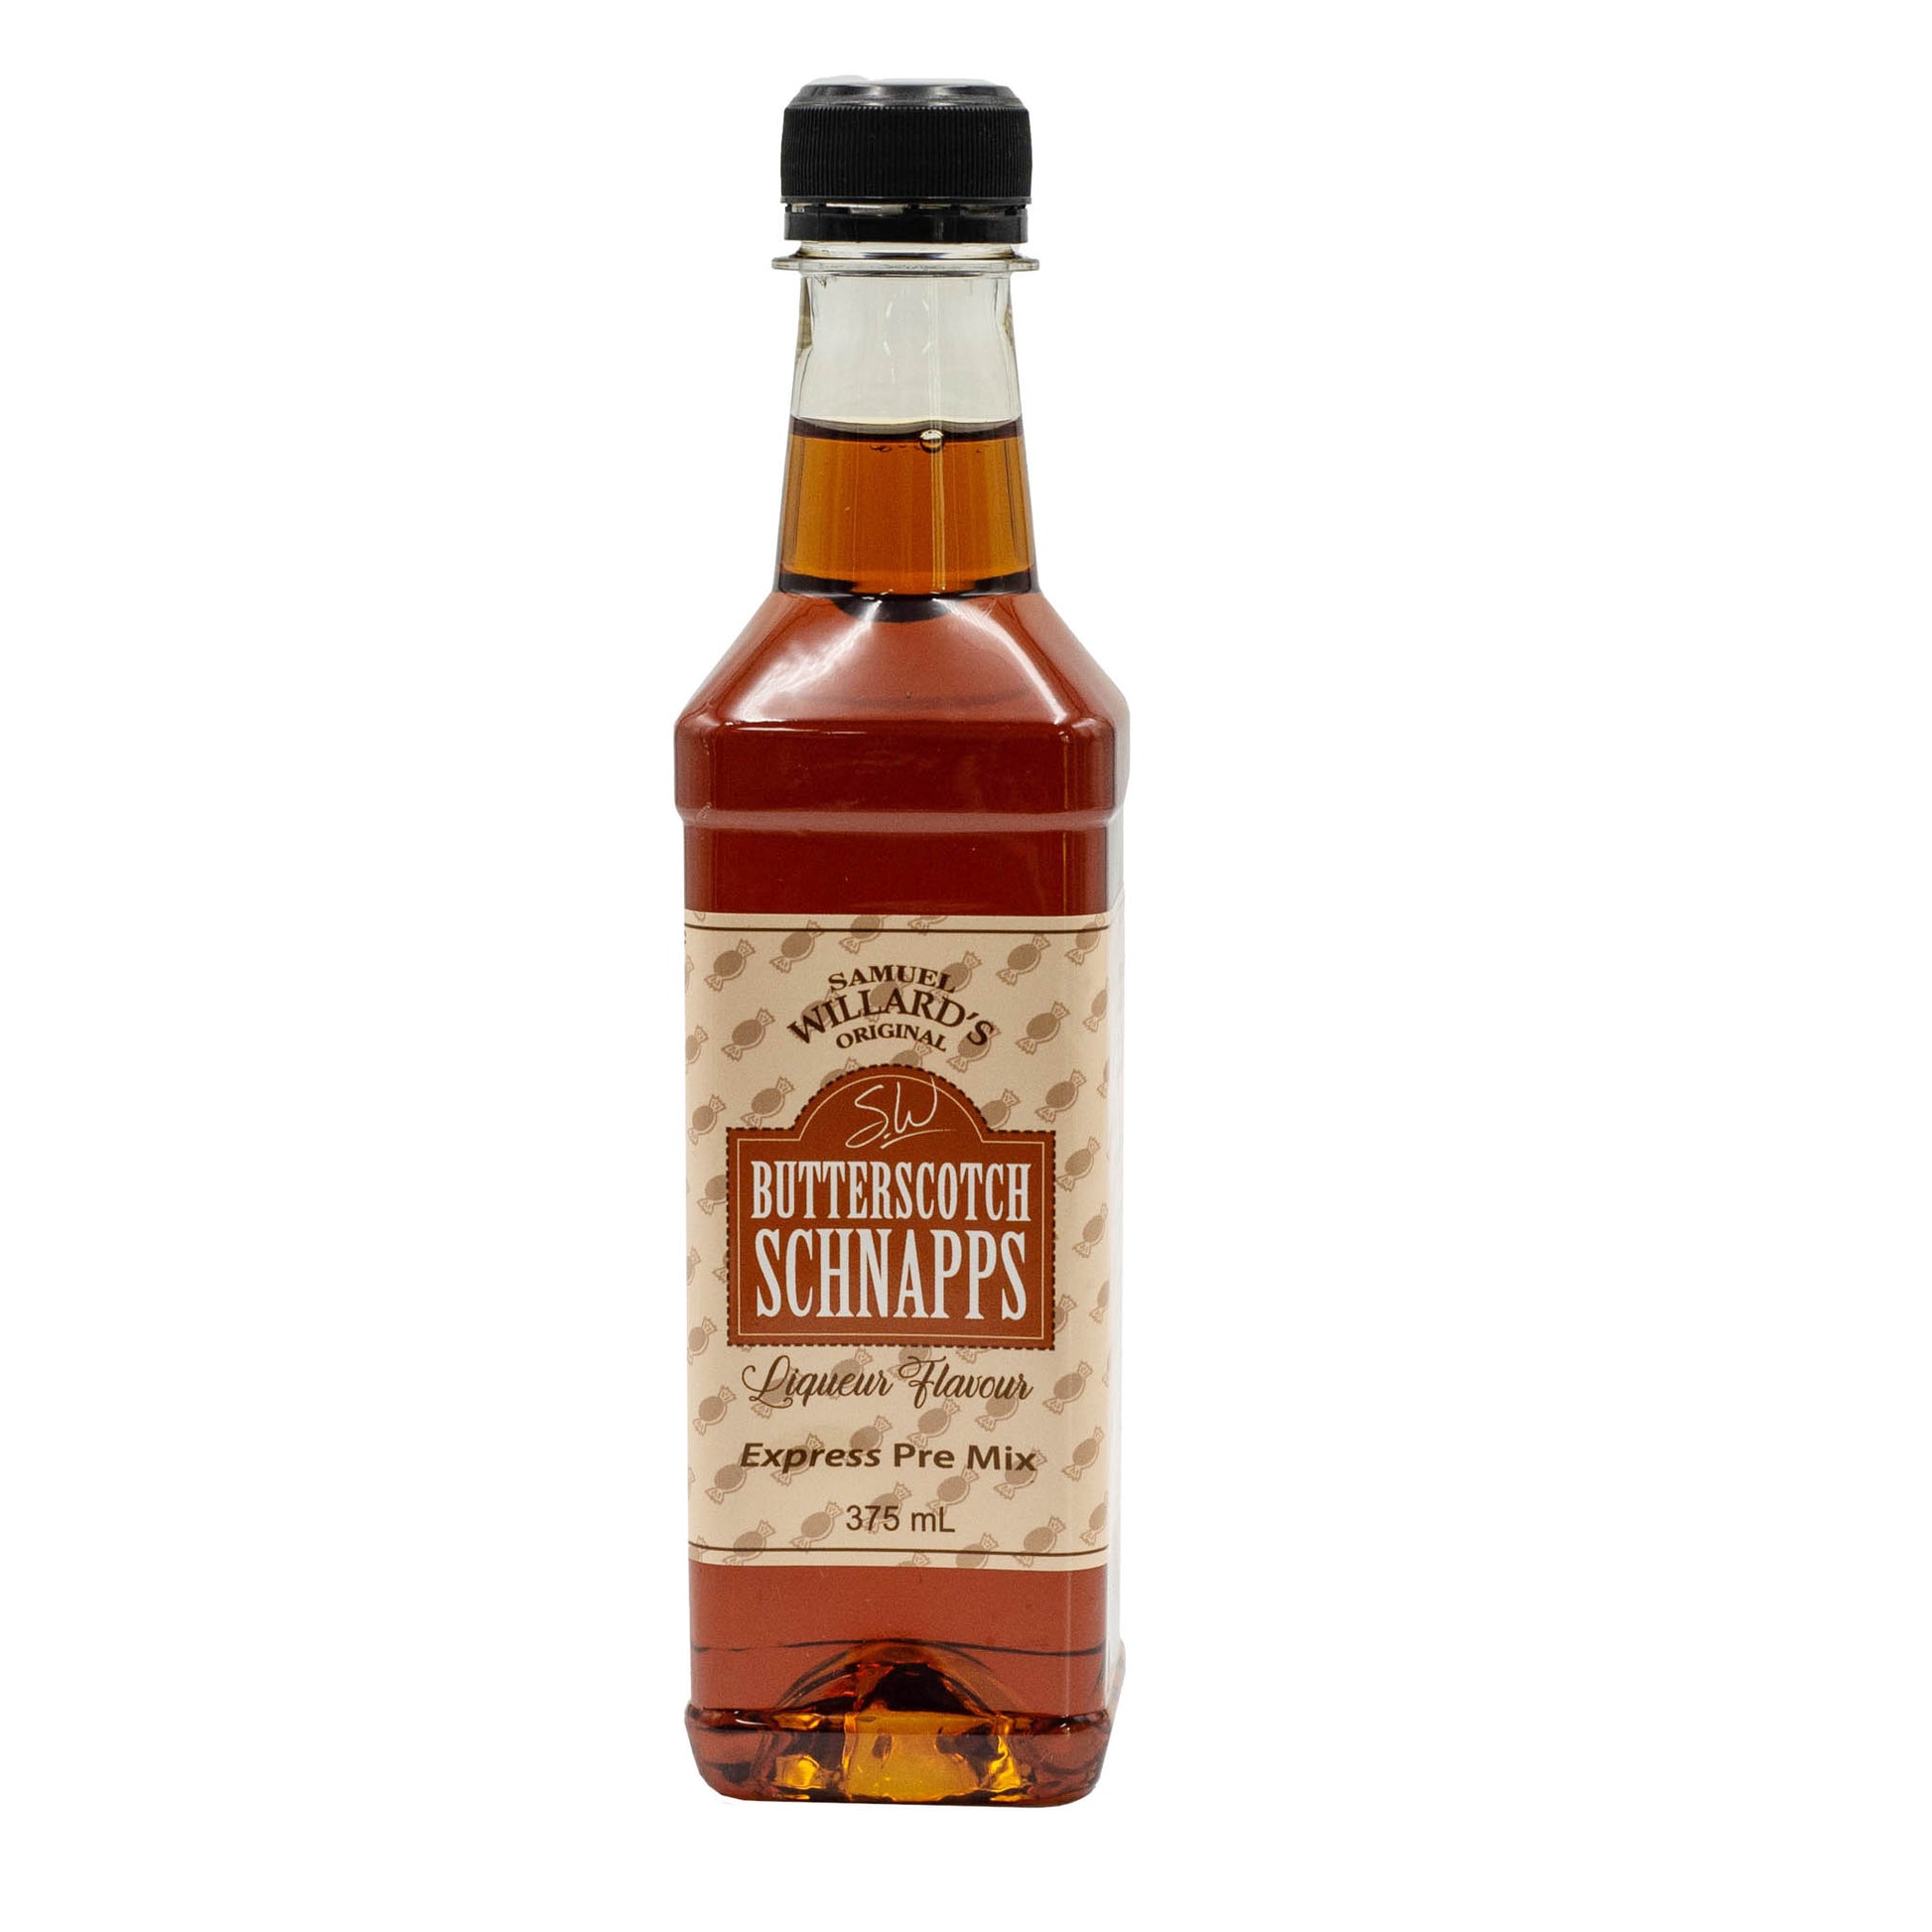 Samuel Willards Butterscotch Schnapps will make 1125mL of finished product from each 375mL bottle